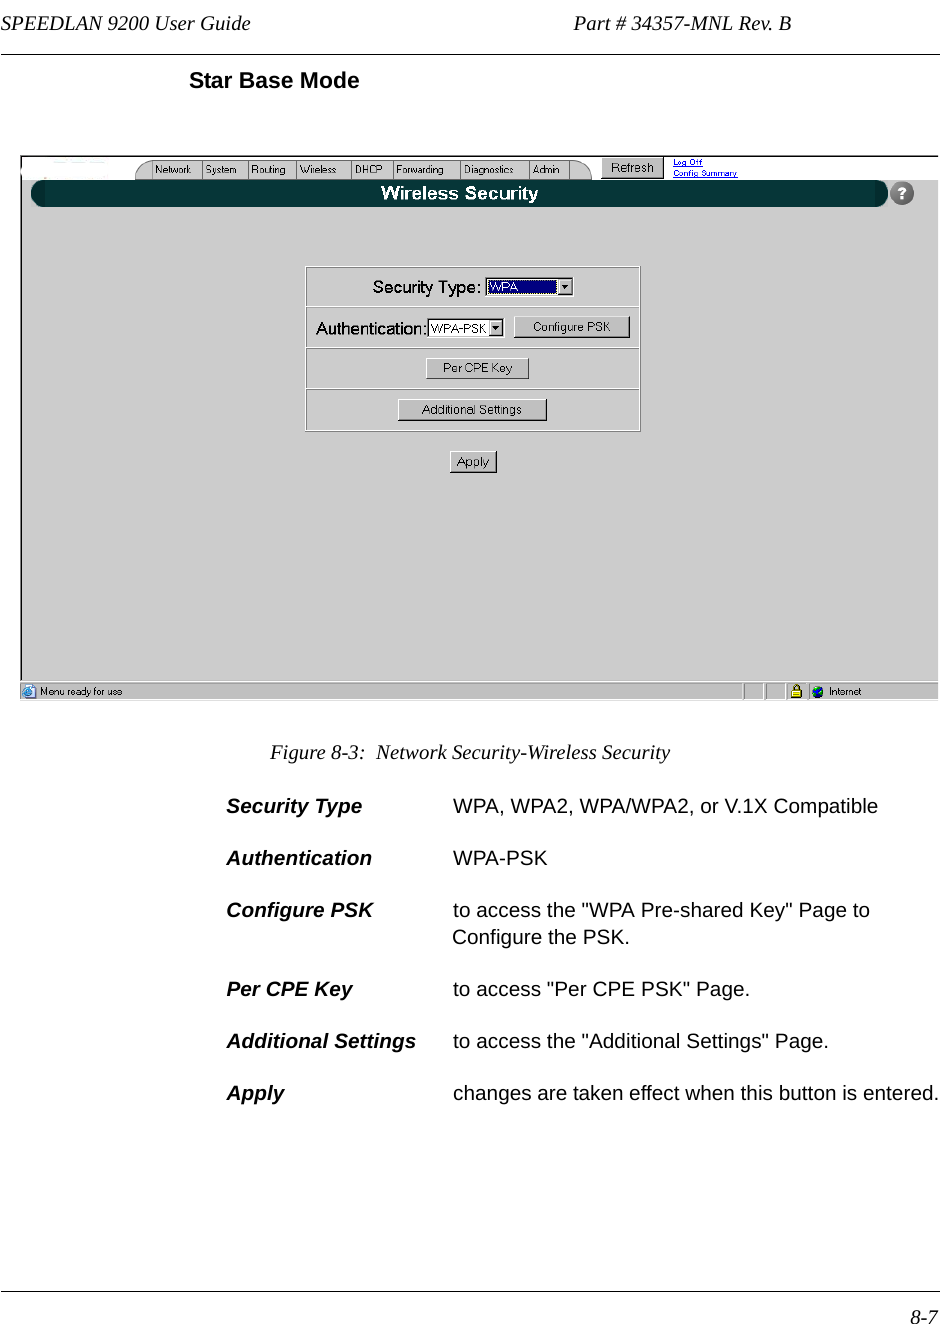 SPEEDLAN 9200 User Guide                                                              Part # 34357-MNL Rev. B      8-7                                                                                                                                                              Star Base ModeFigure 8-3:  Network Security-Wireless SecuritySecurity Type  WPA, WPA2, WPA/WPA2, or V.1X CompatibleAuthentication  WPA-PSKConfigure PSK  to access the &quot;WPA Pre-shared Key&quot; Page to Configure the PSK. Per CPE Key to access &quot;Per CPE PSK&quot; Page.Additional Settings to access the &quot;Additional Settings&quot; Page.Apply  changes are taken effect when this button is entered.